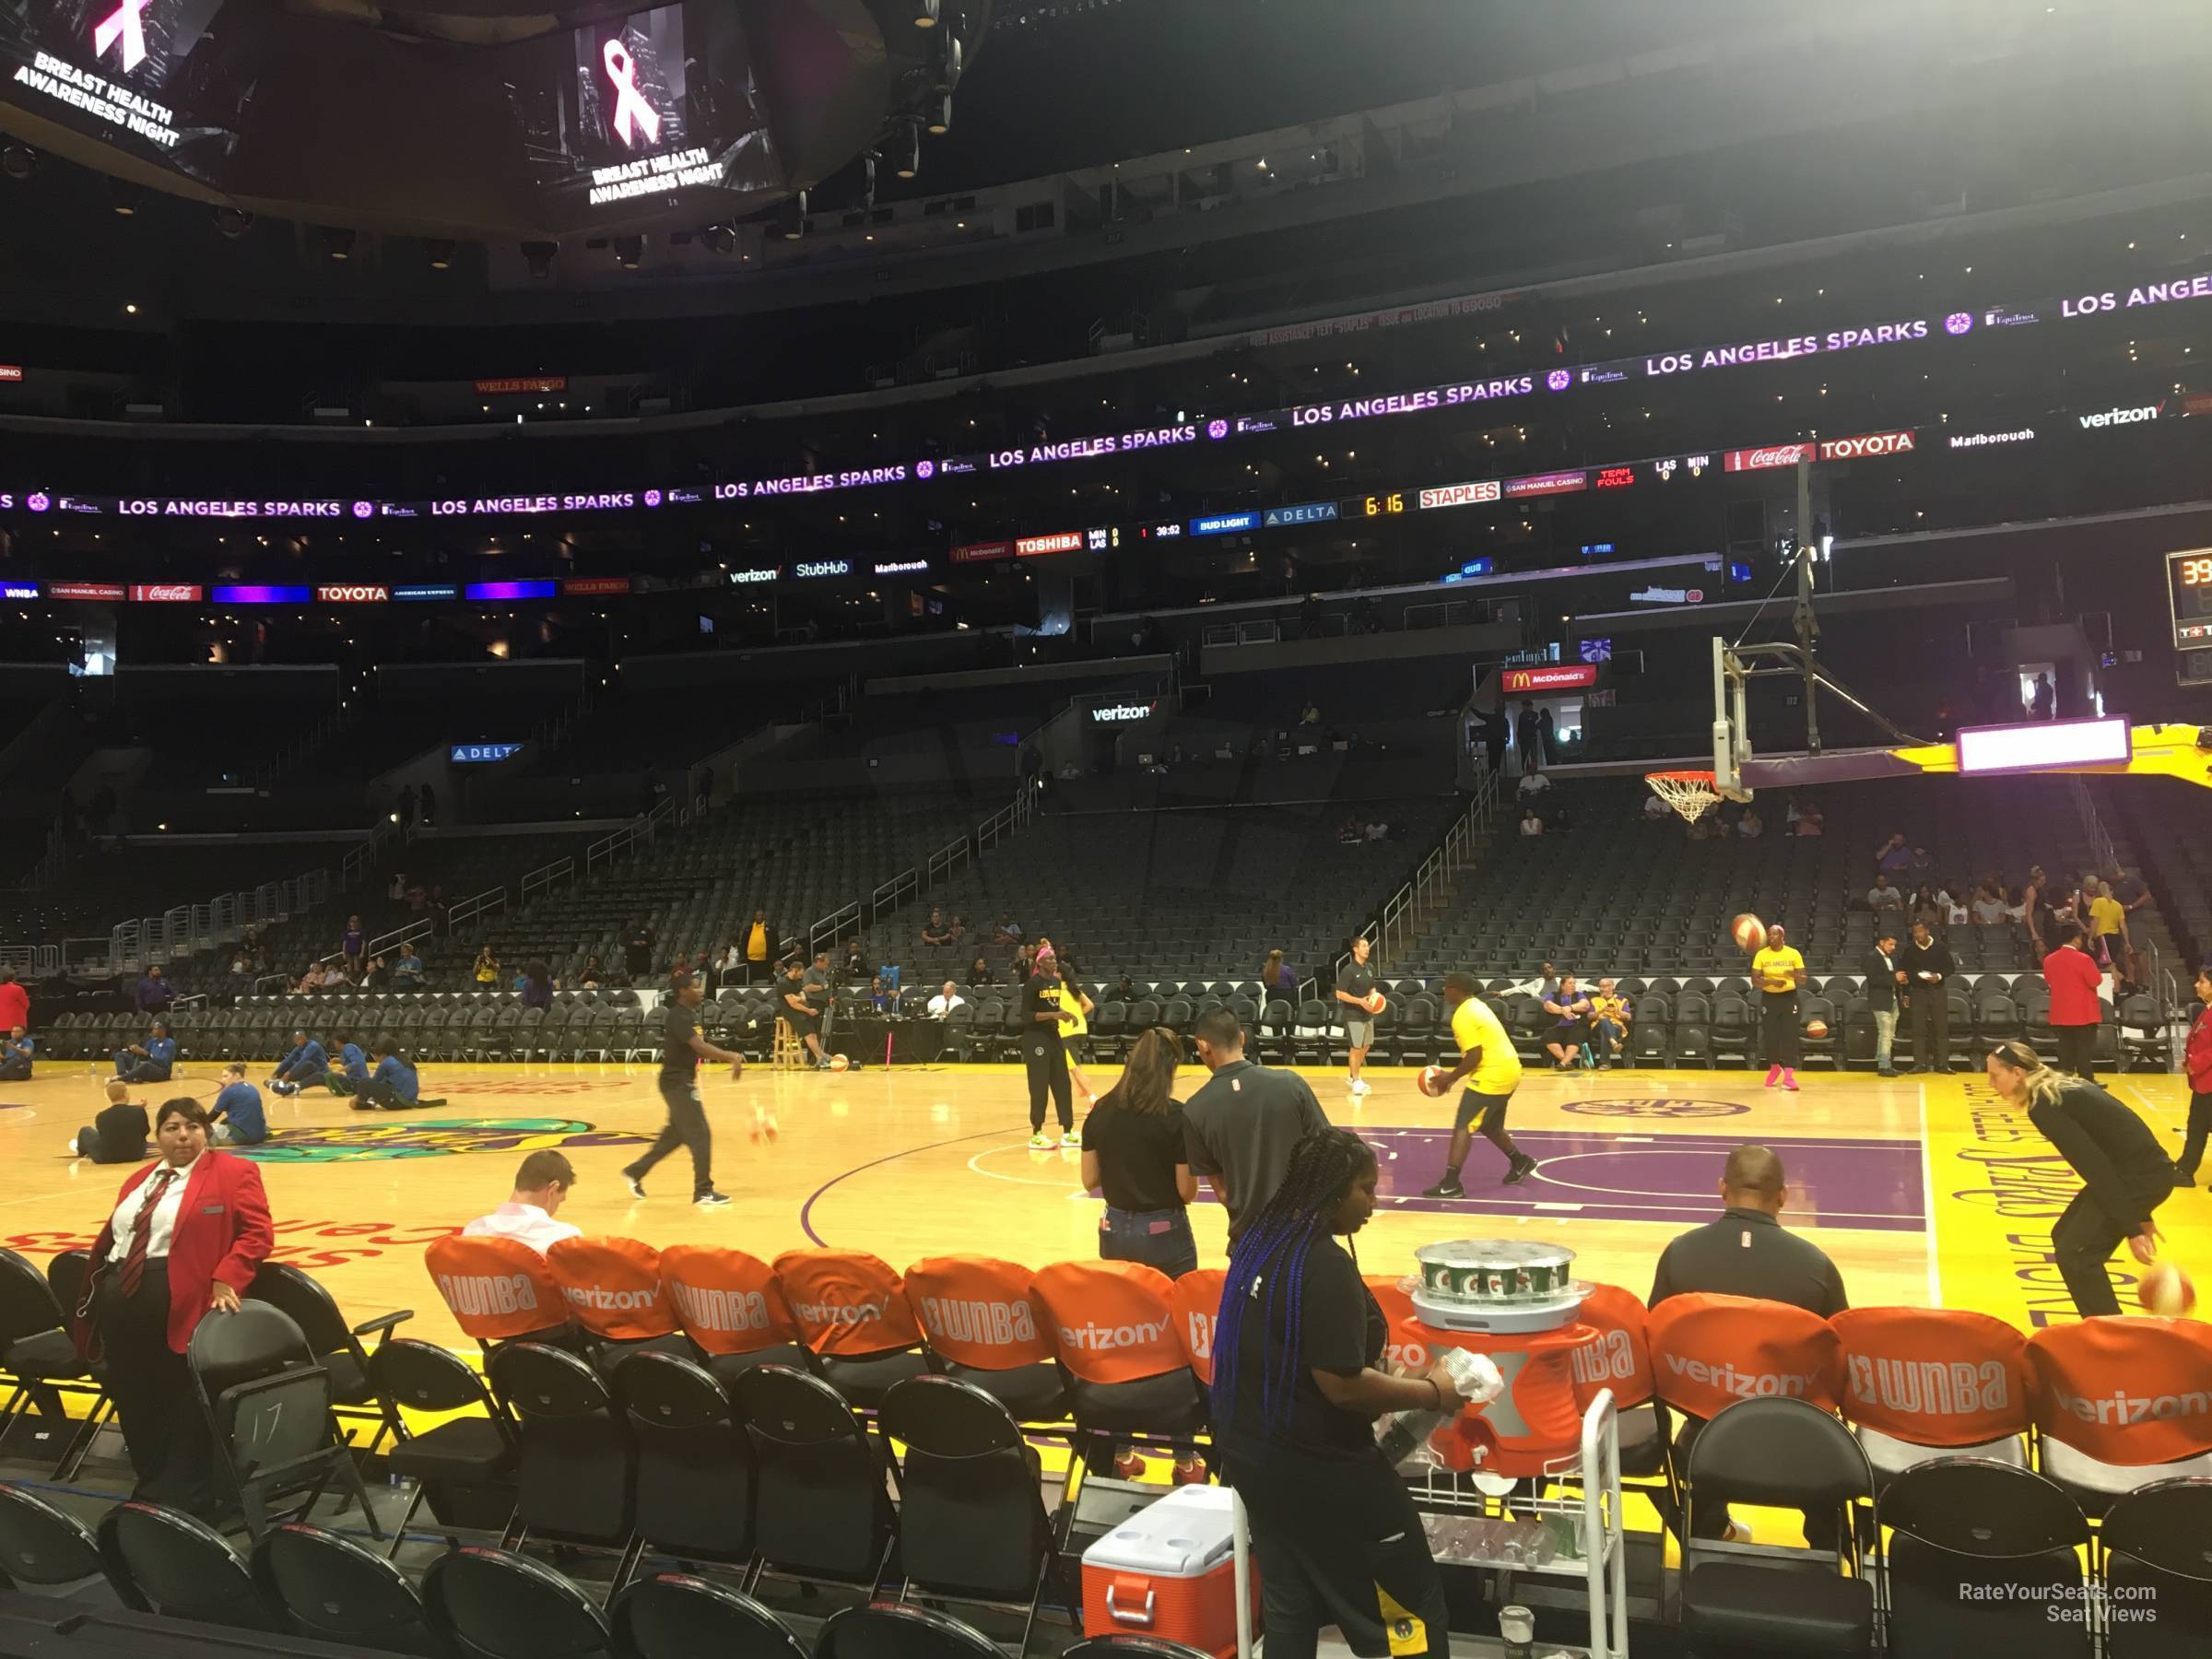 Staples Center Section 119 - Clippers/Lakers - RateYourSeats.com